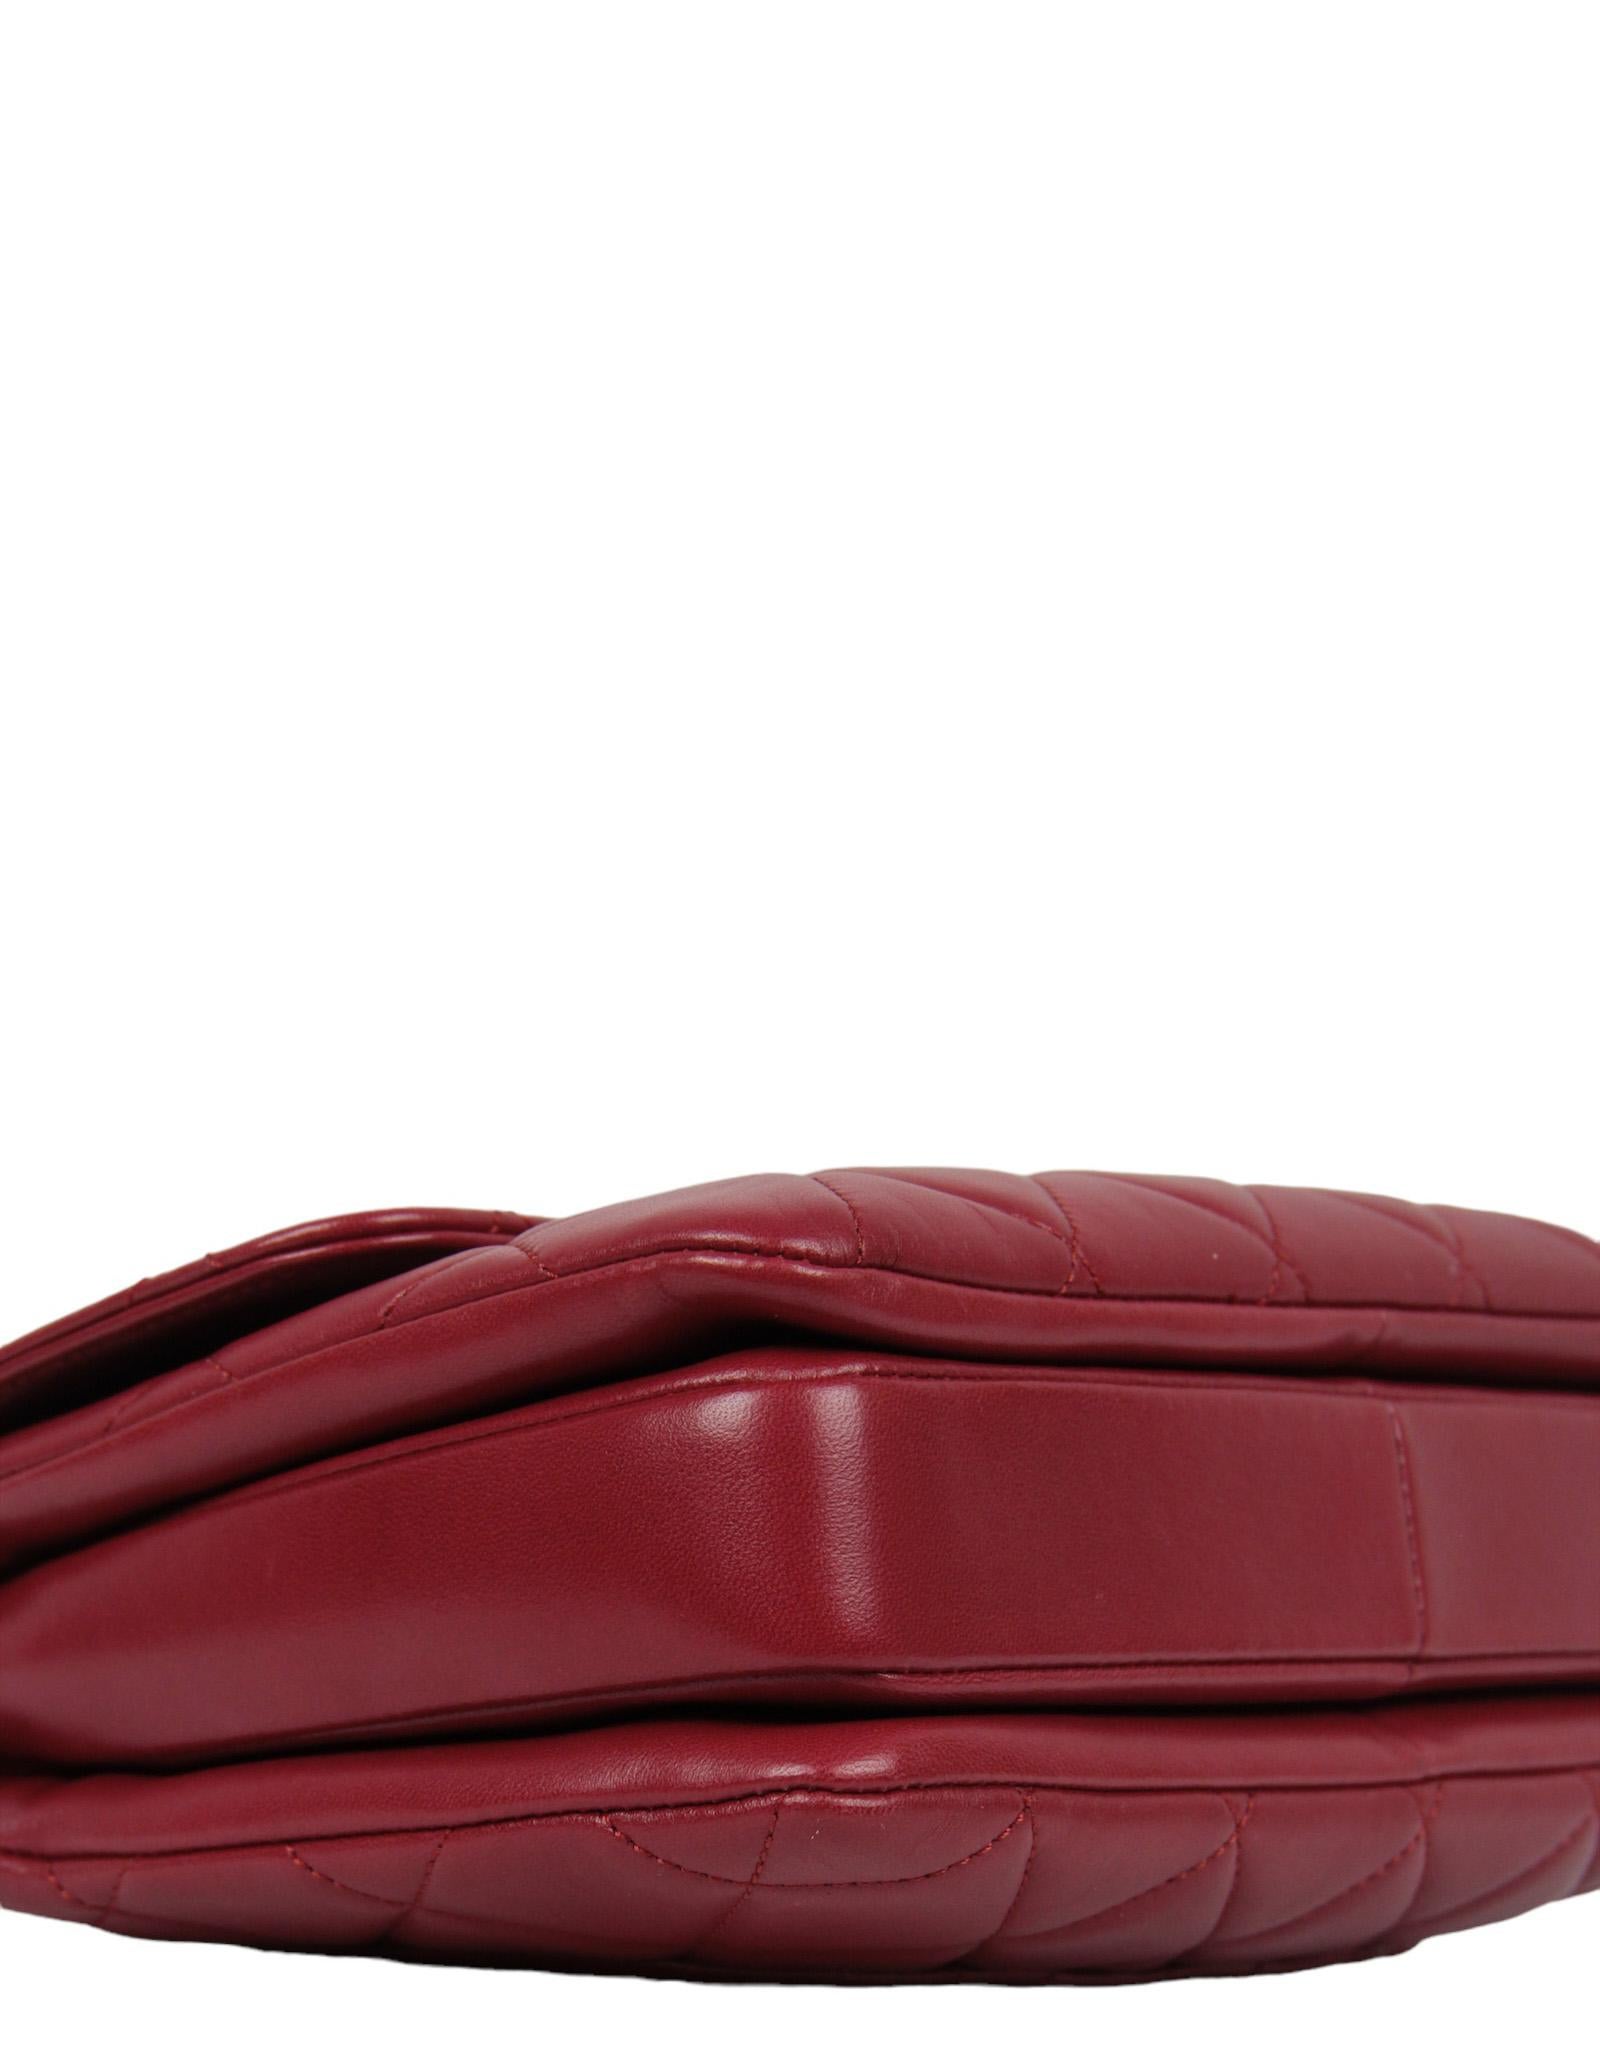 Chanel Burgundy Lambskin Quilted Trendy CC Dual Handle Flap Bag For Sale 1